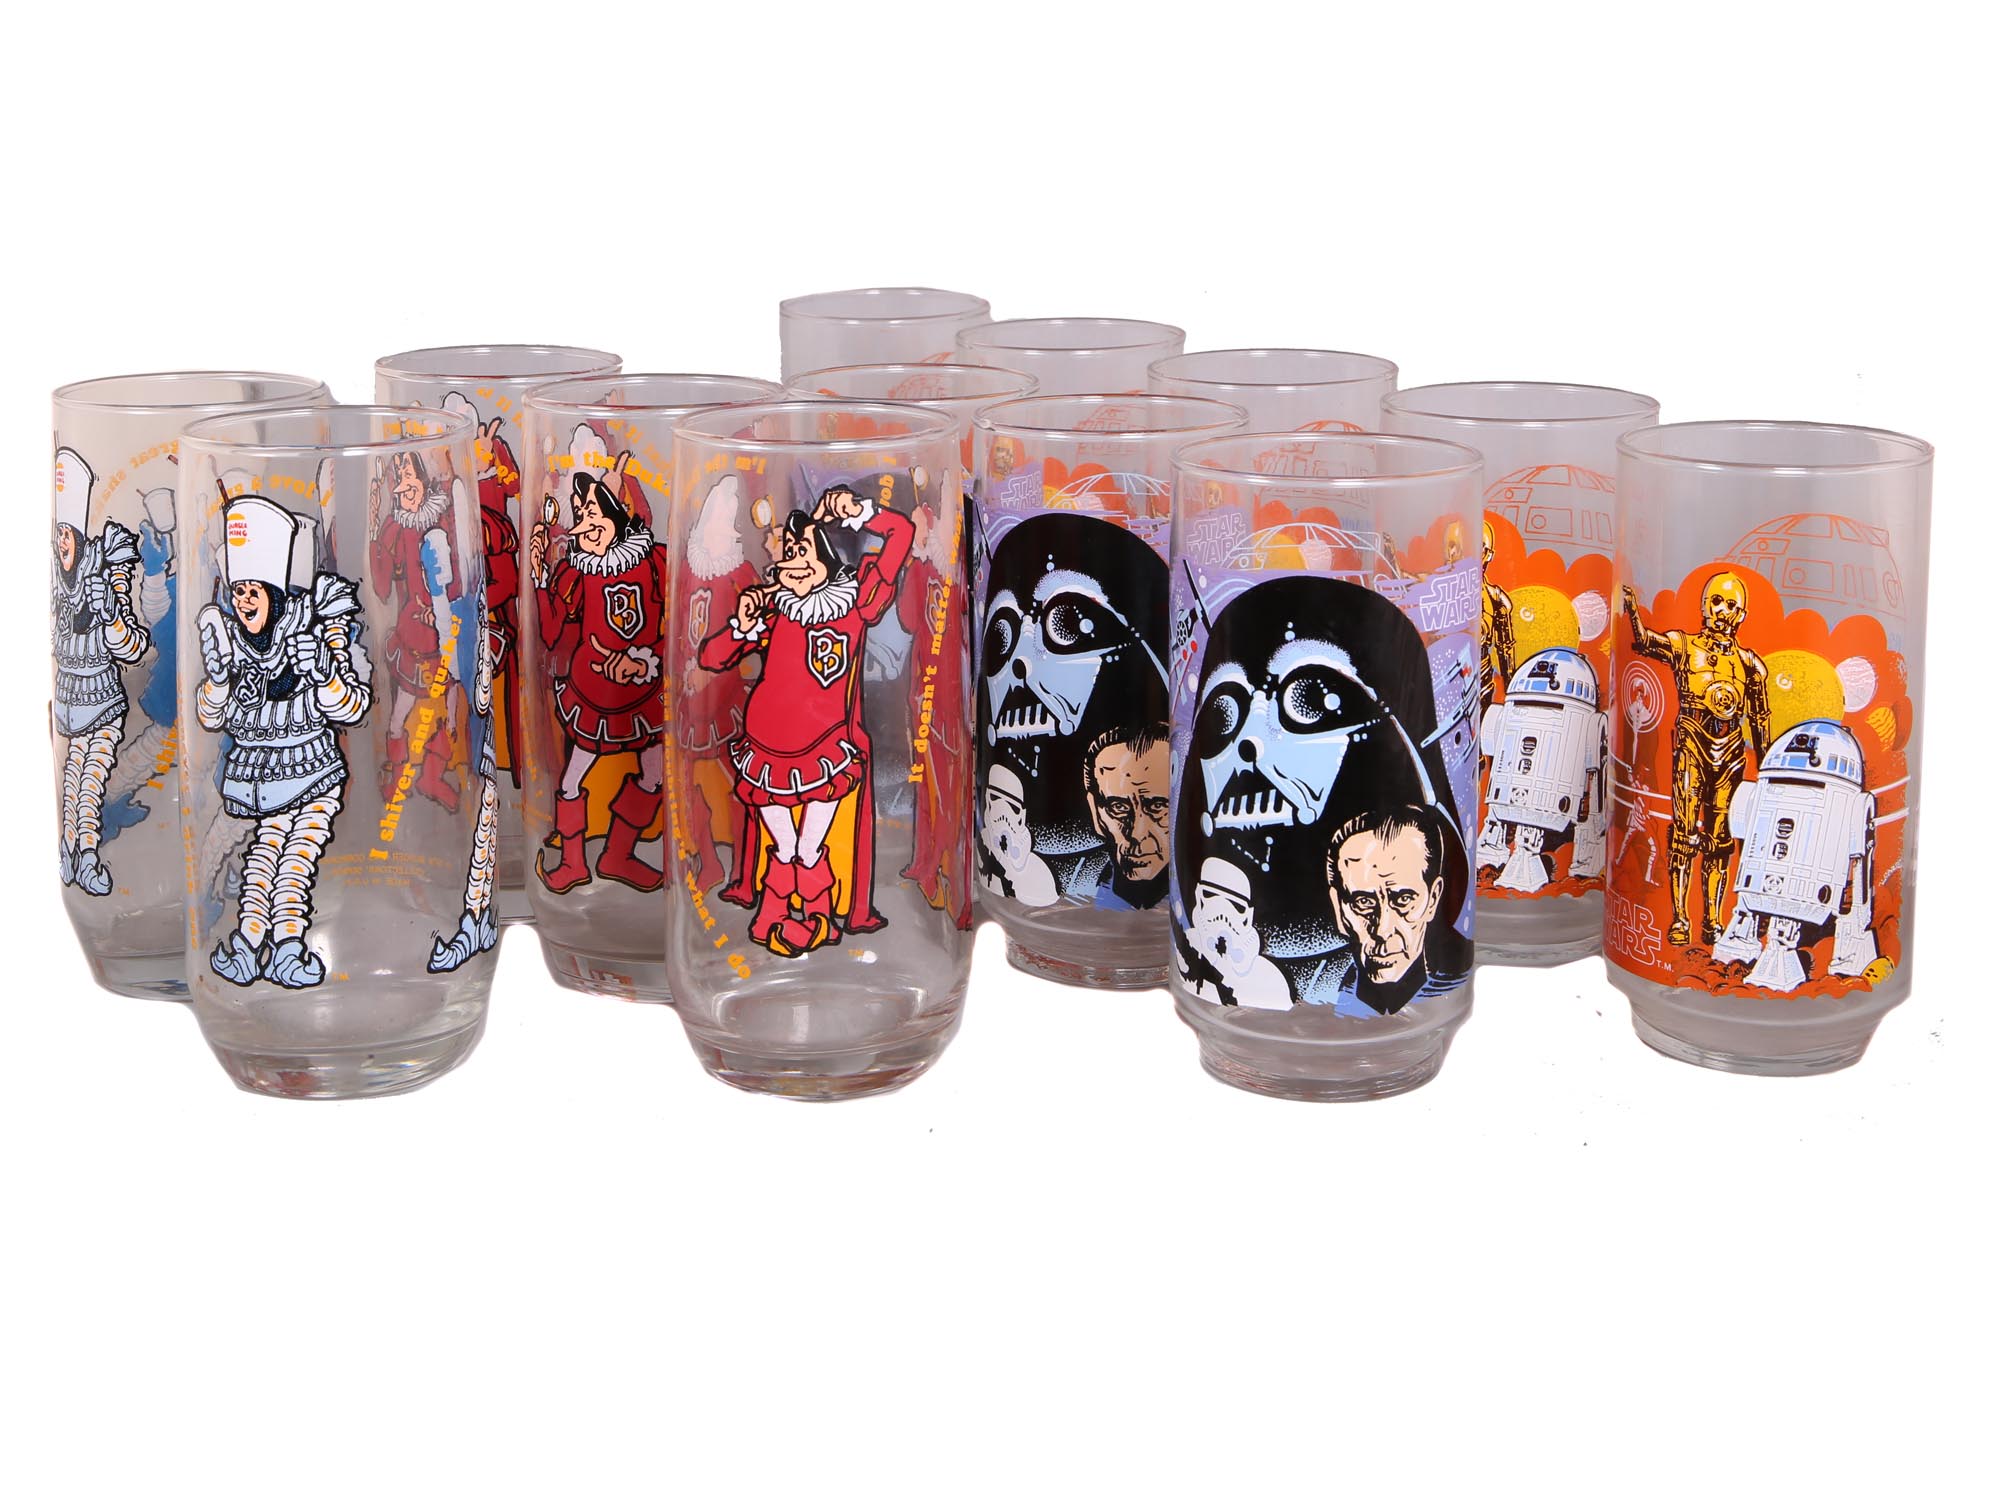 STAR WARS AND DUKE OF DOUBT GLASS SETS VINTAGE PIC-0